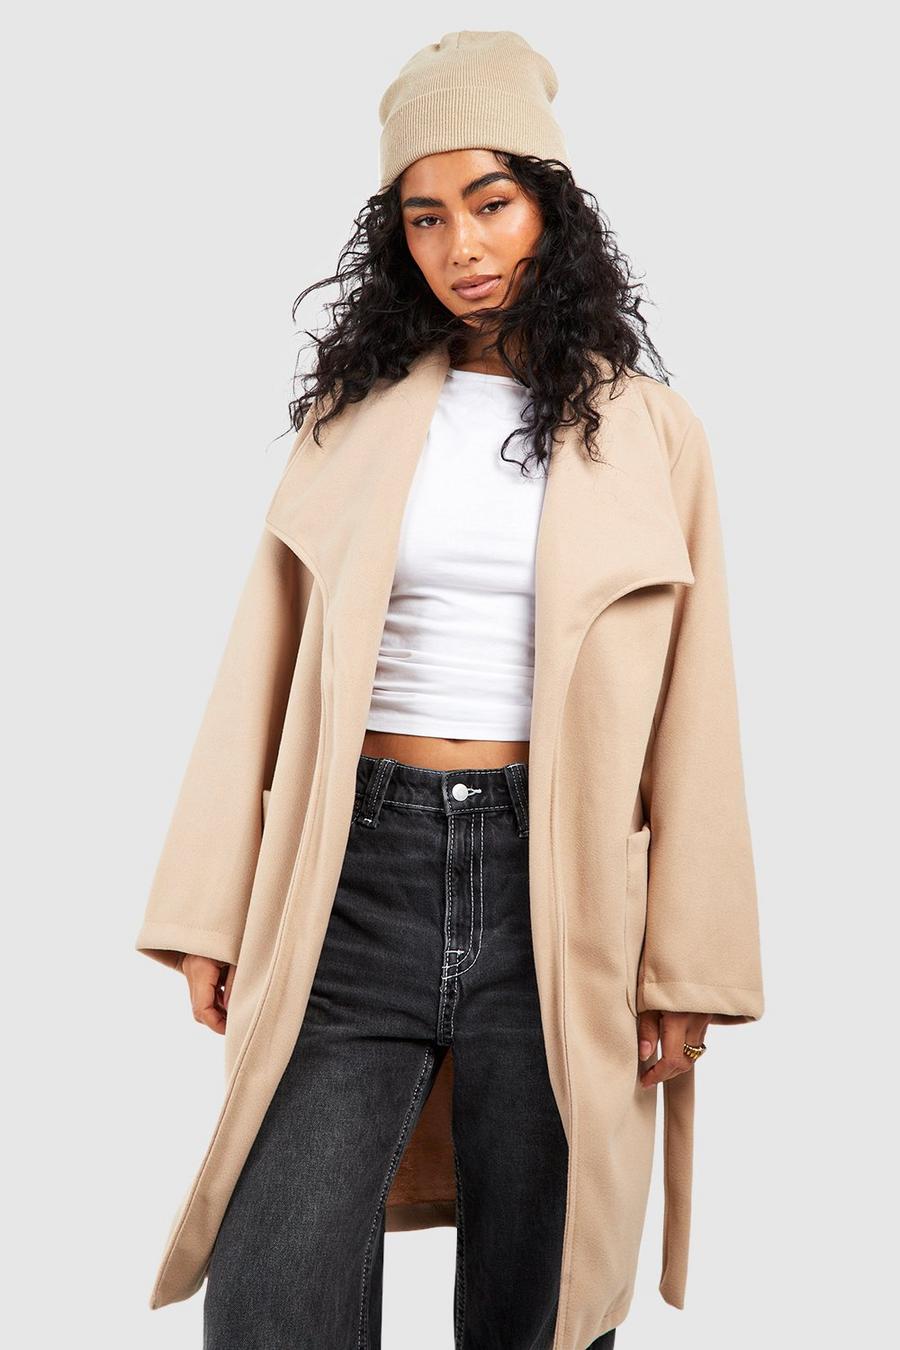 Remains systematic Control Duster Coats | Women's Duster Coats & Jackets | boohoo USA